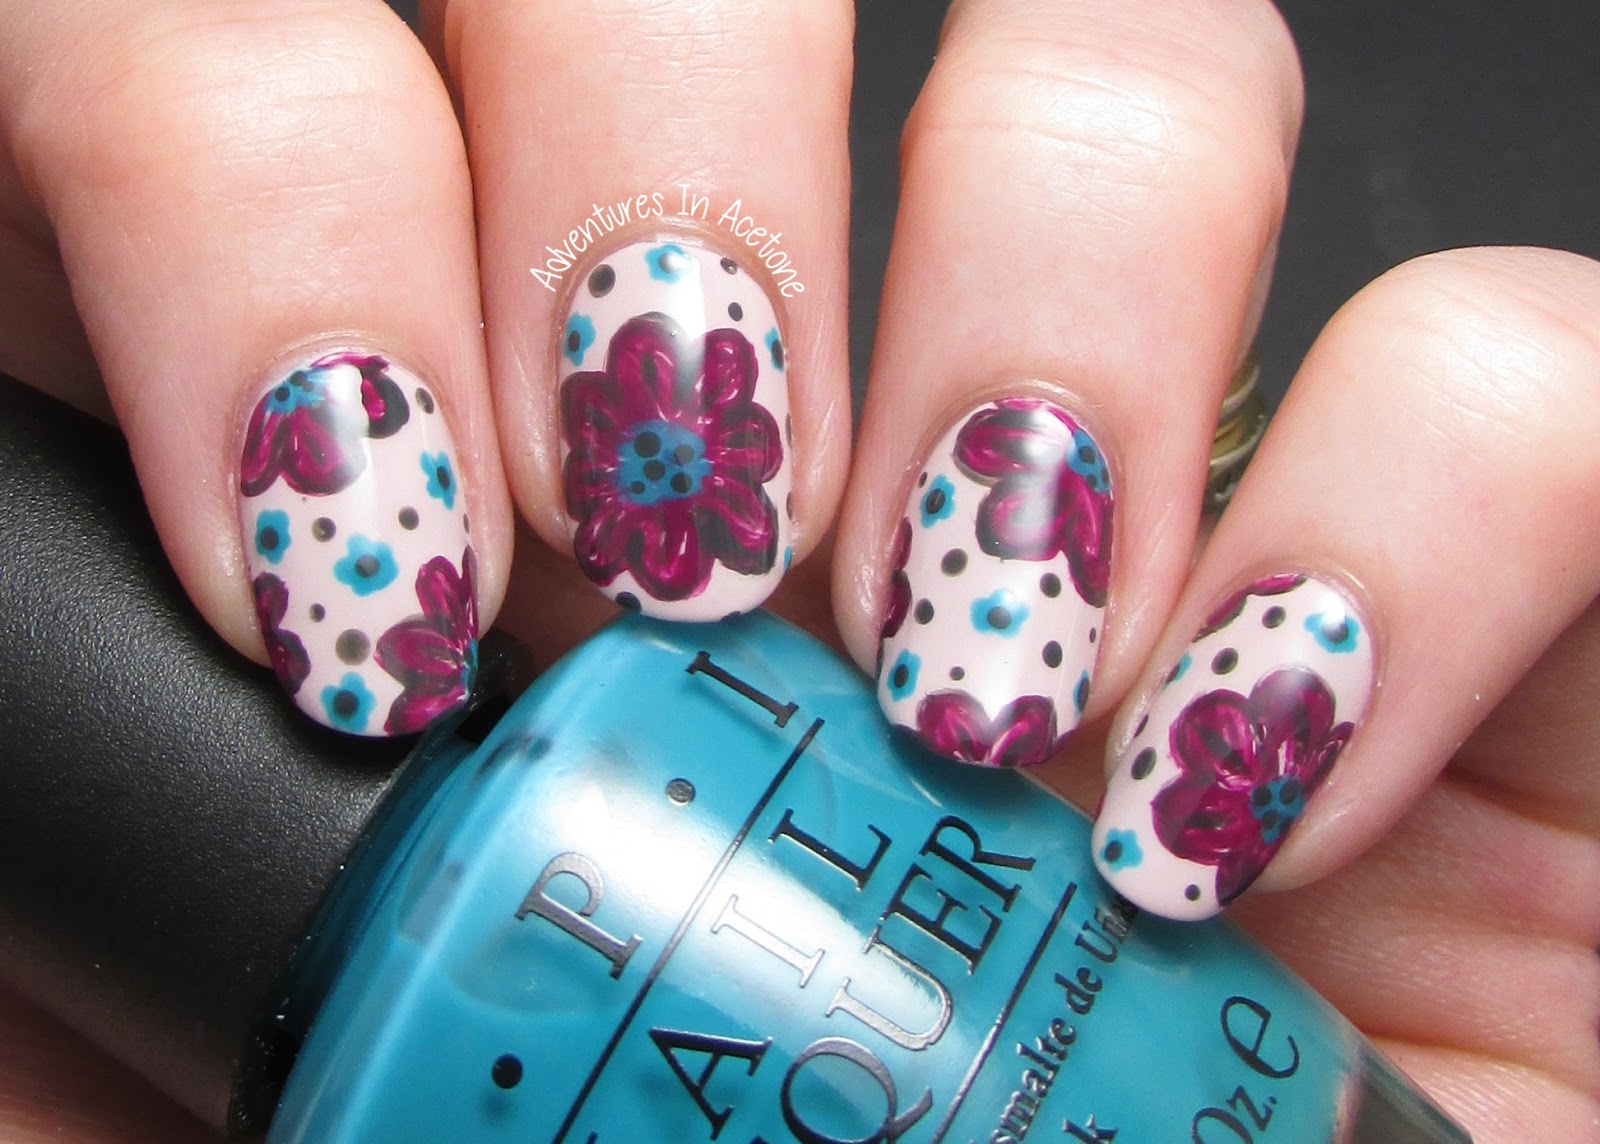 OPI Nail Art Gallery - wide 3